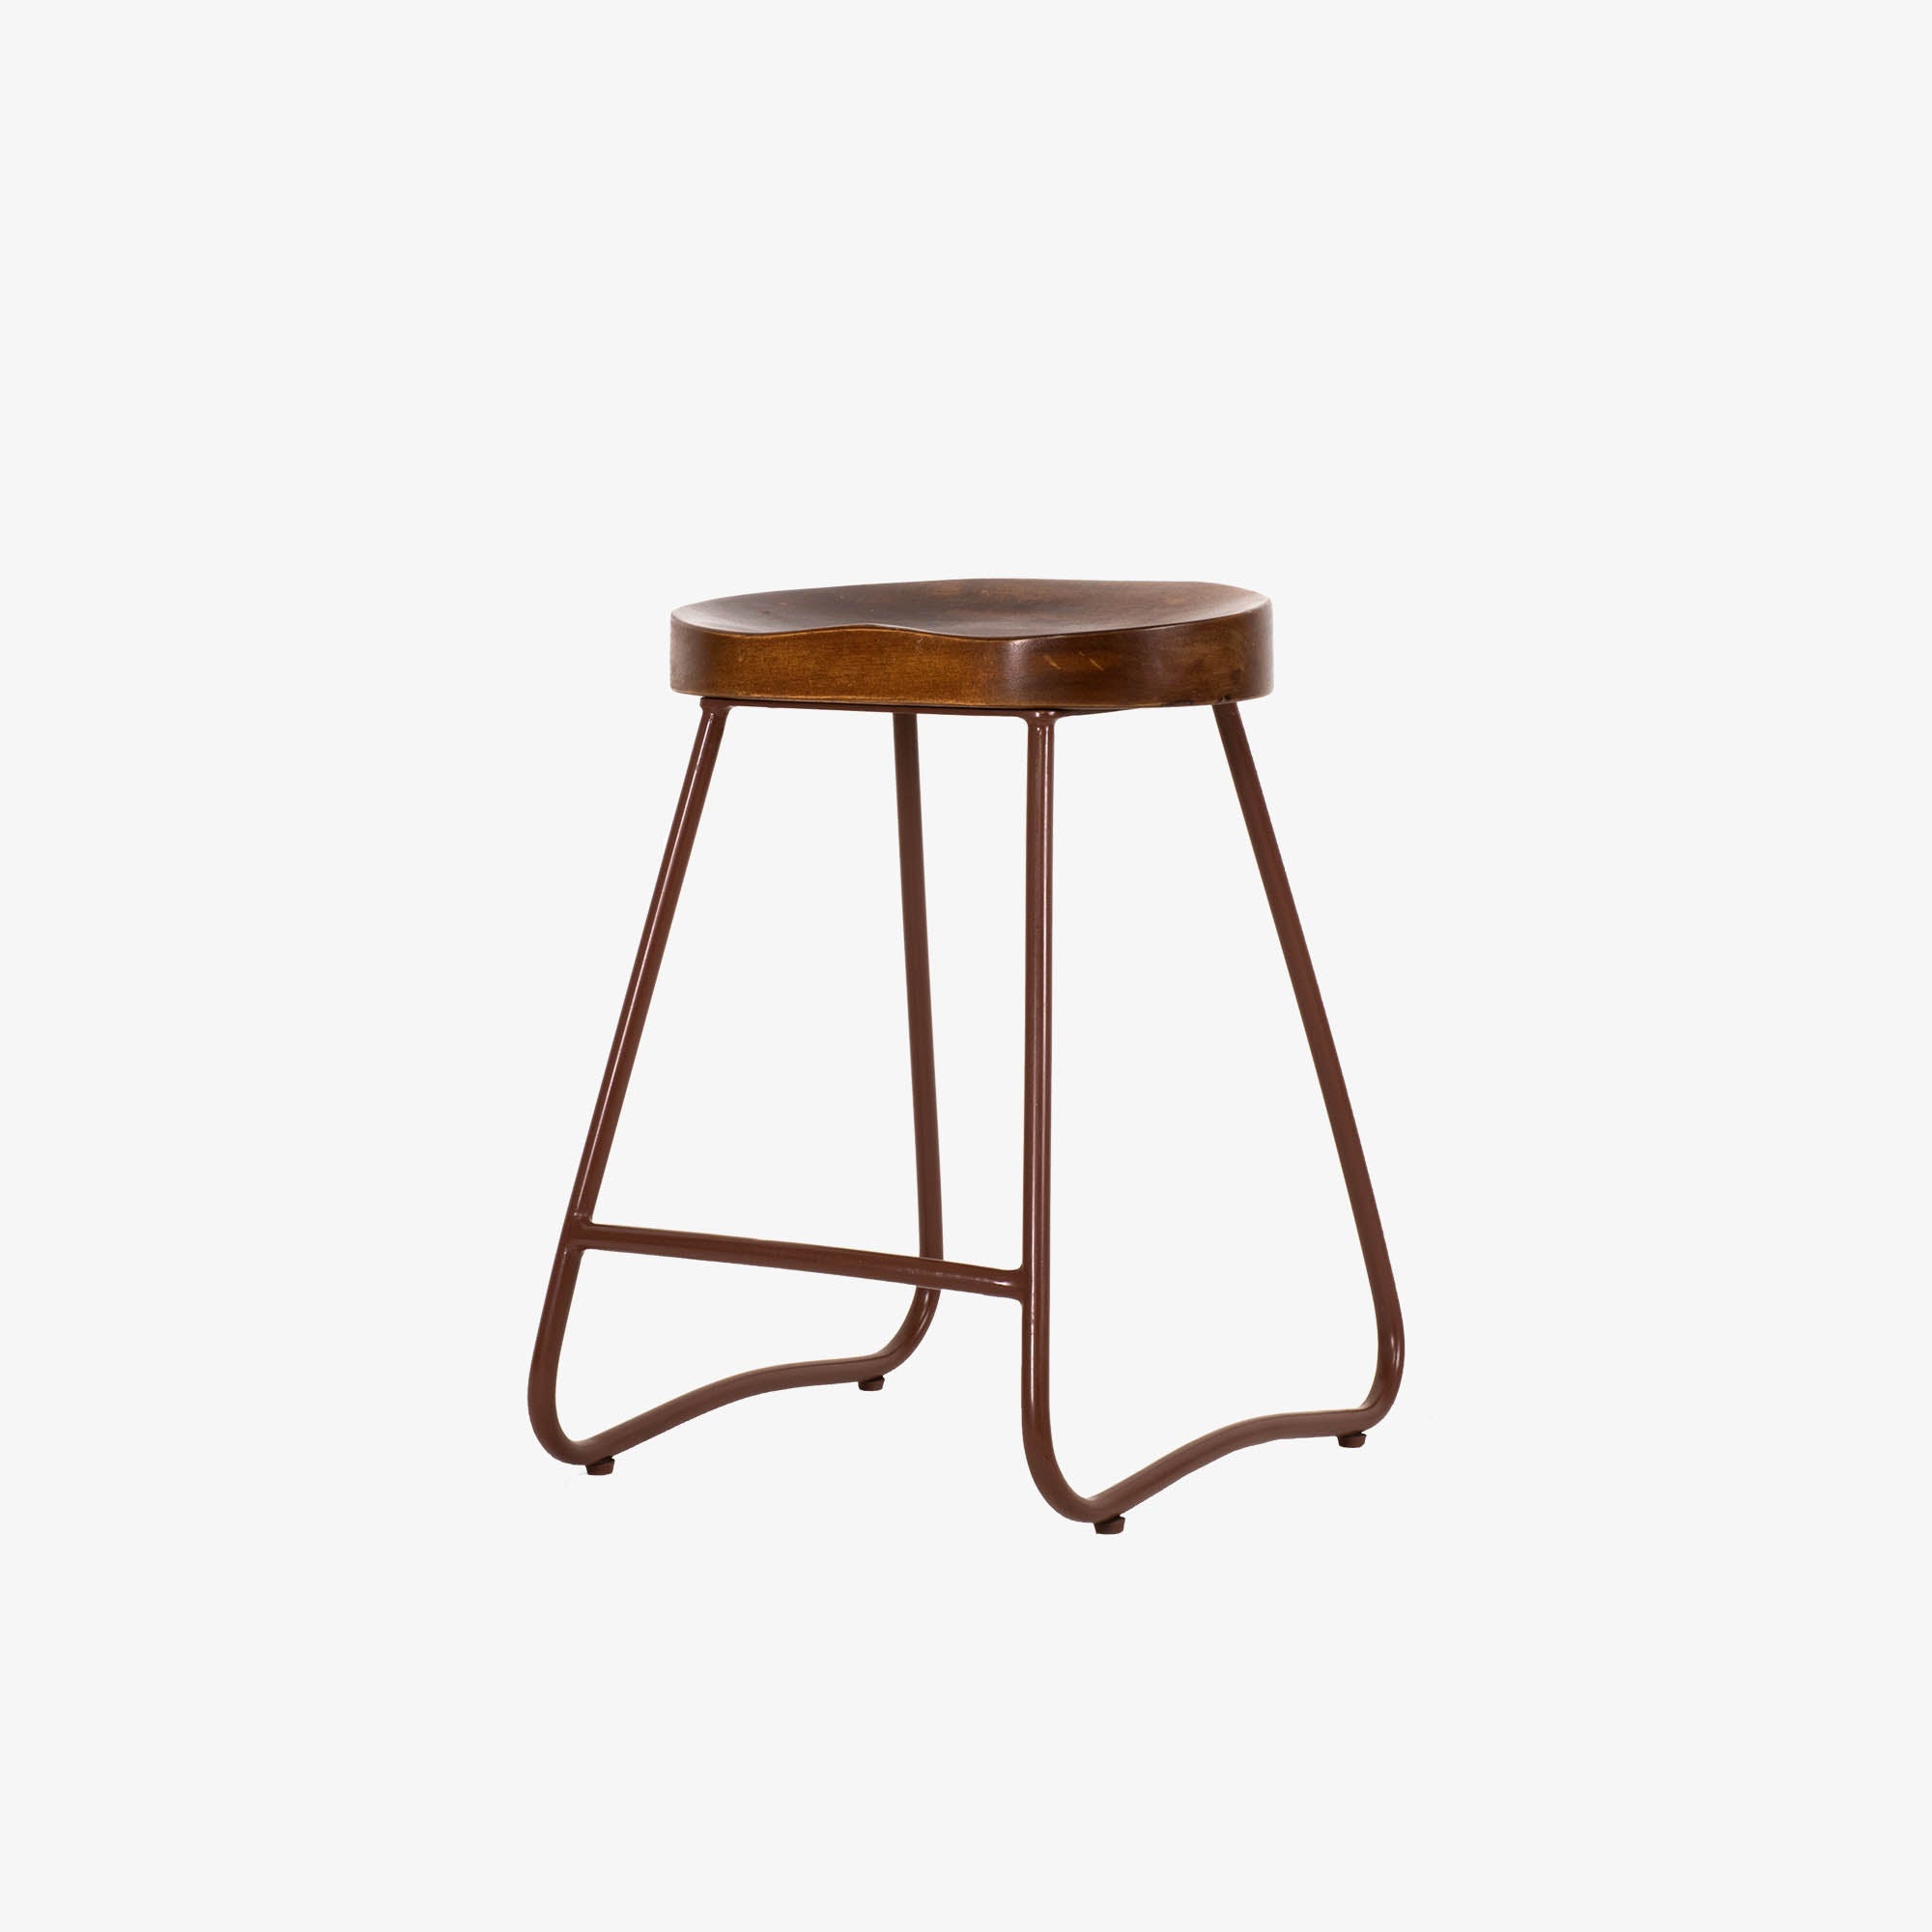 Stool finly – terra